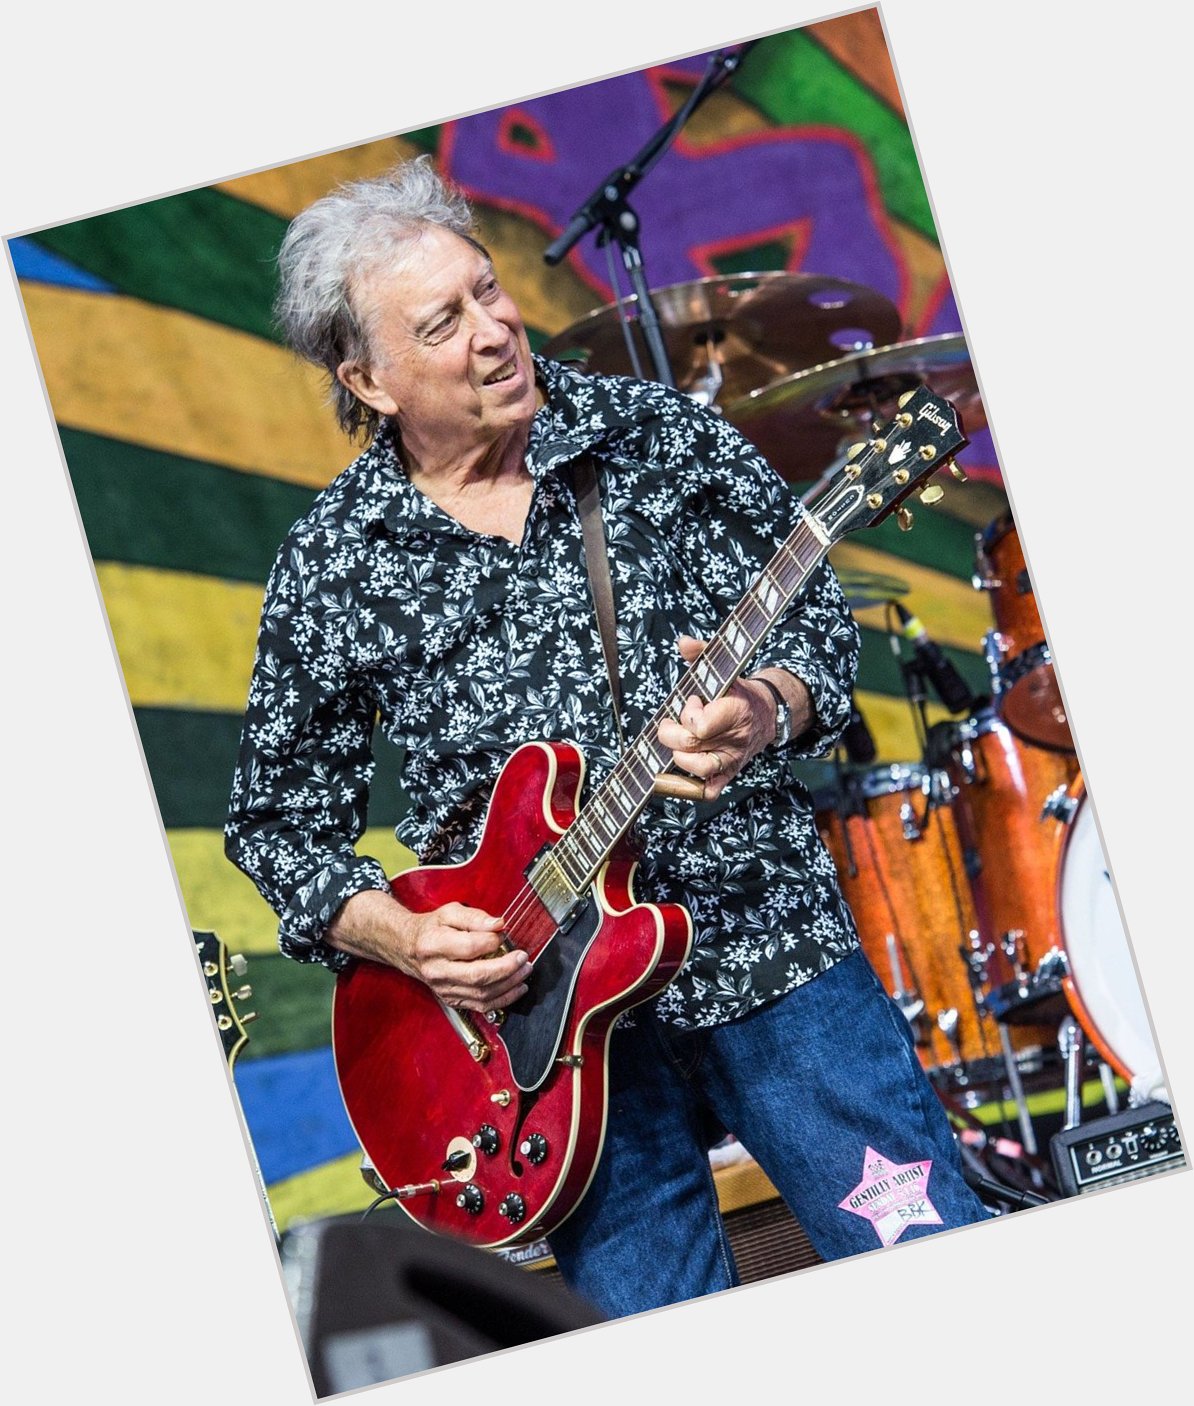 Please join us here at in wishing the one and only Elvin Bishop a very Happy 75th Birthday today  